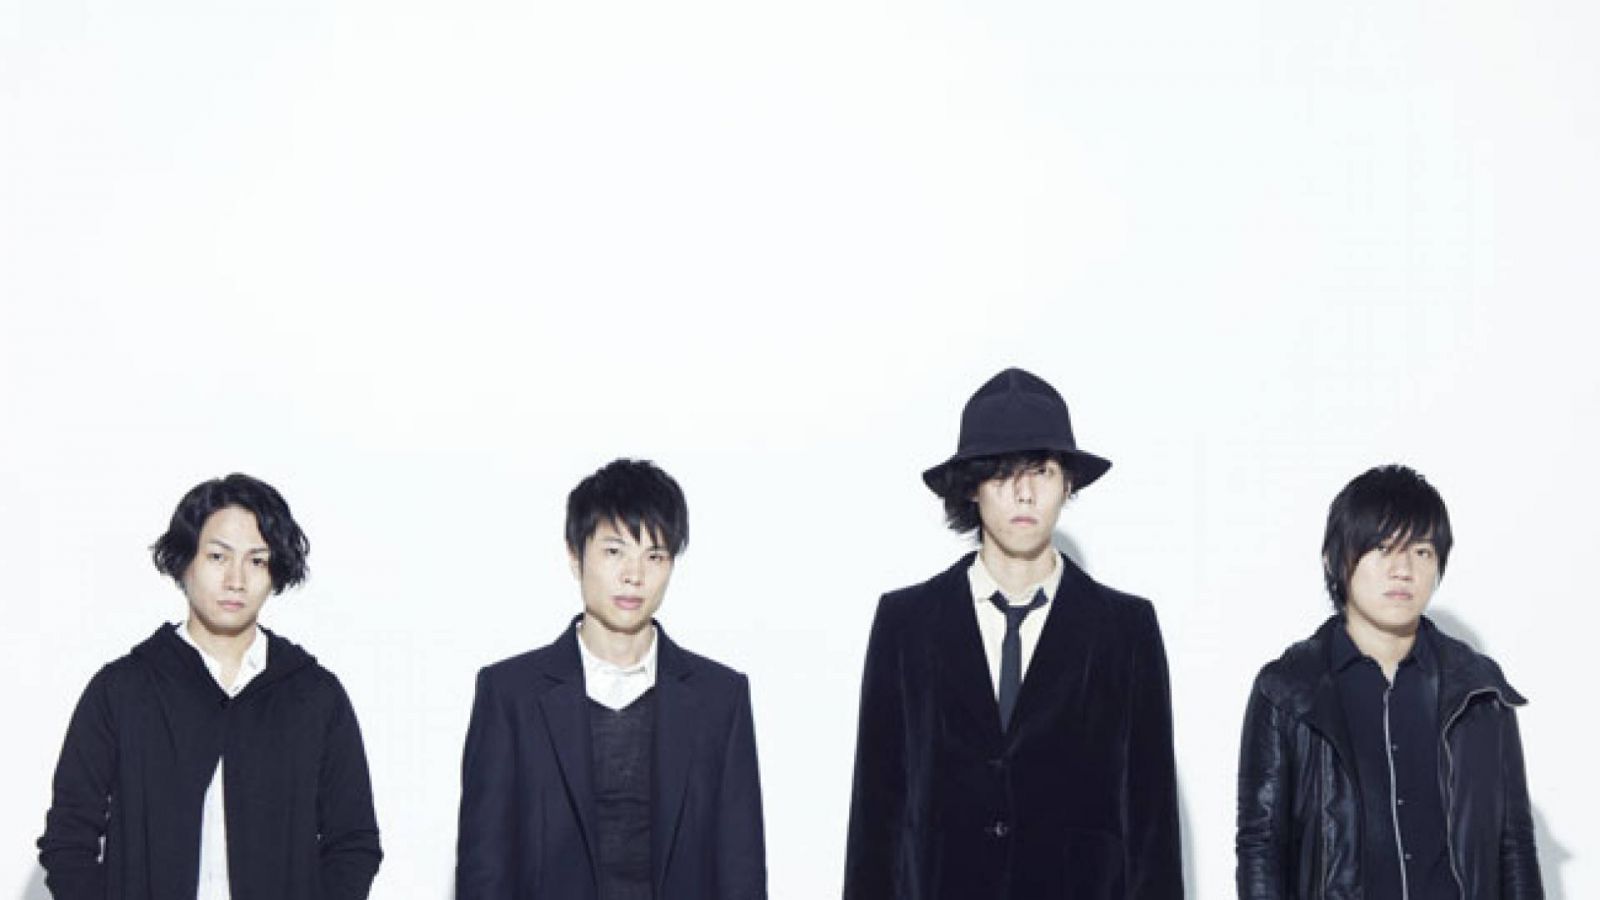 RADWIMPS' London Concert Ticket Giveaway Contest © 2015 UNIVERSAL MUSIC LLC. All rights reserved.